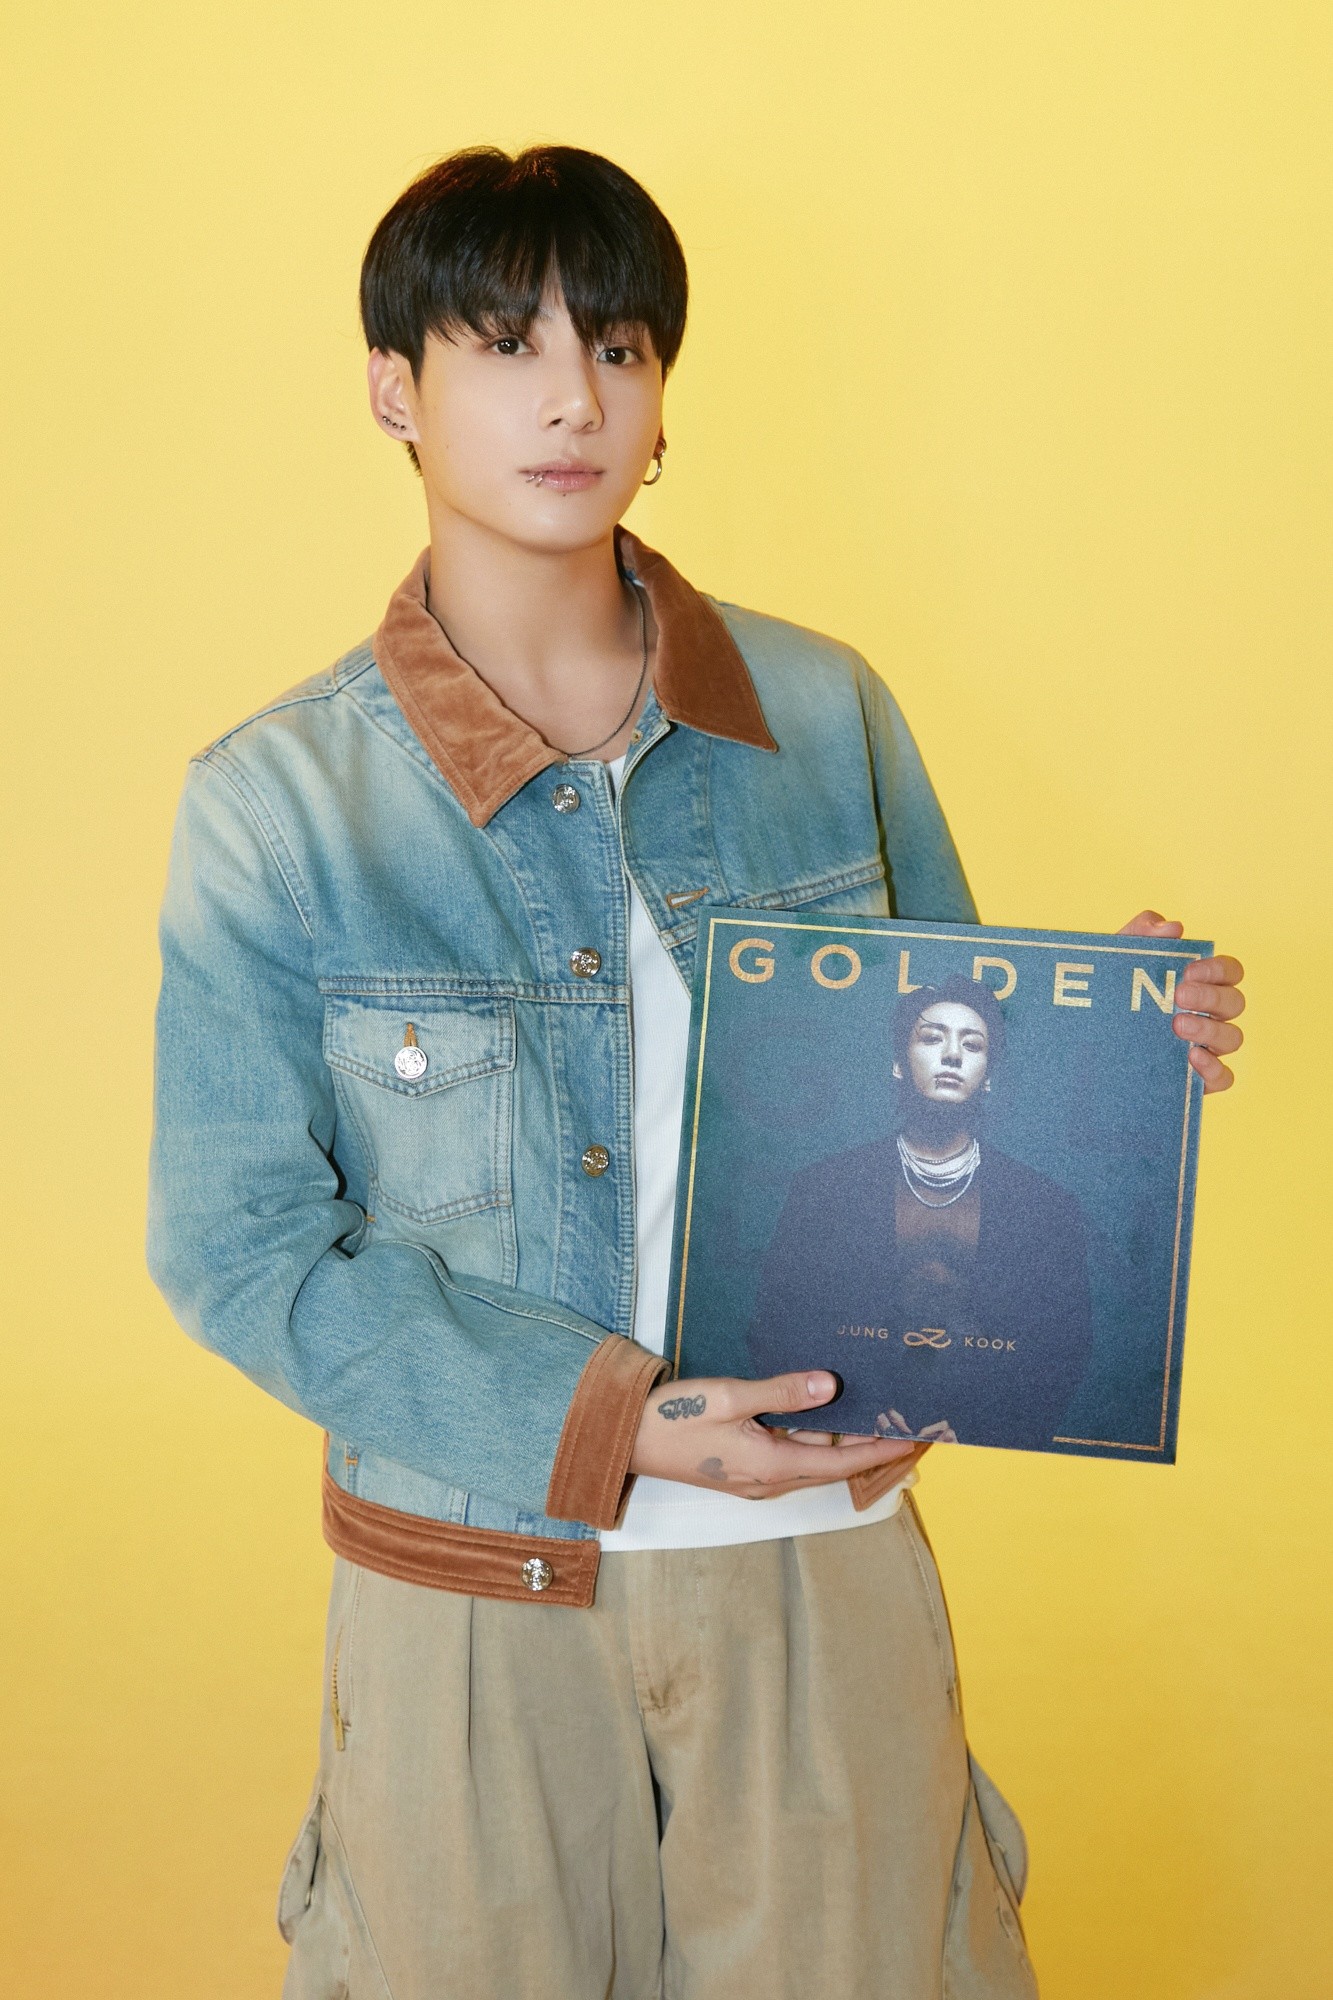 BTS Jungkook's Standing Next to You Solo Album Release Date - News